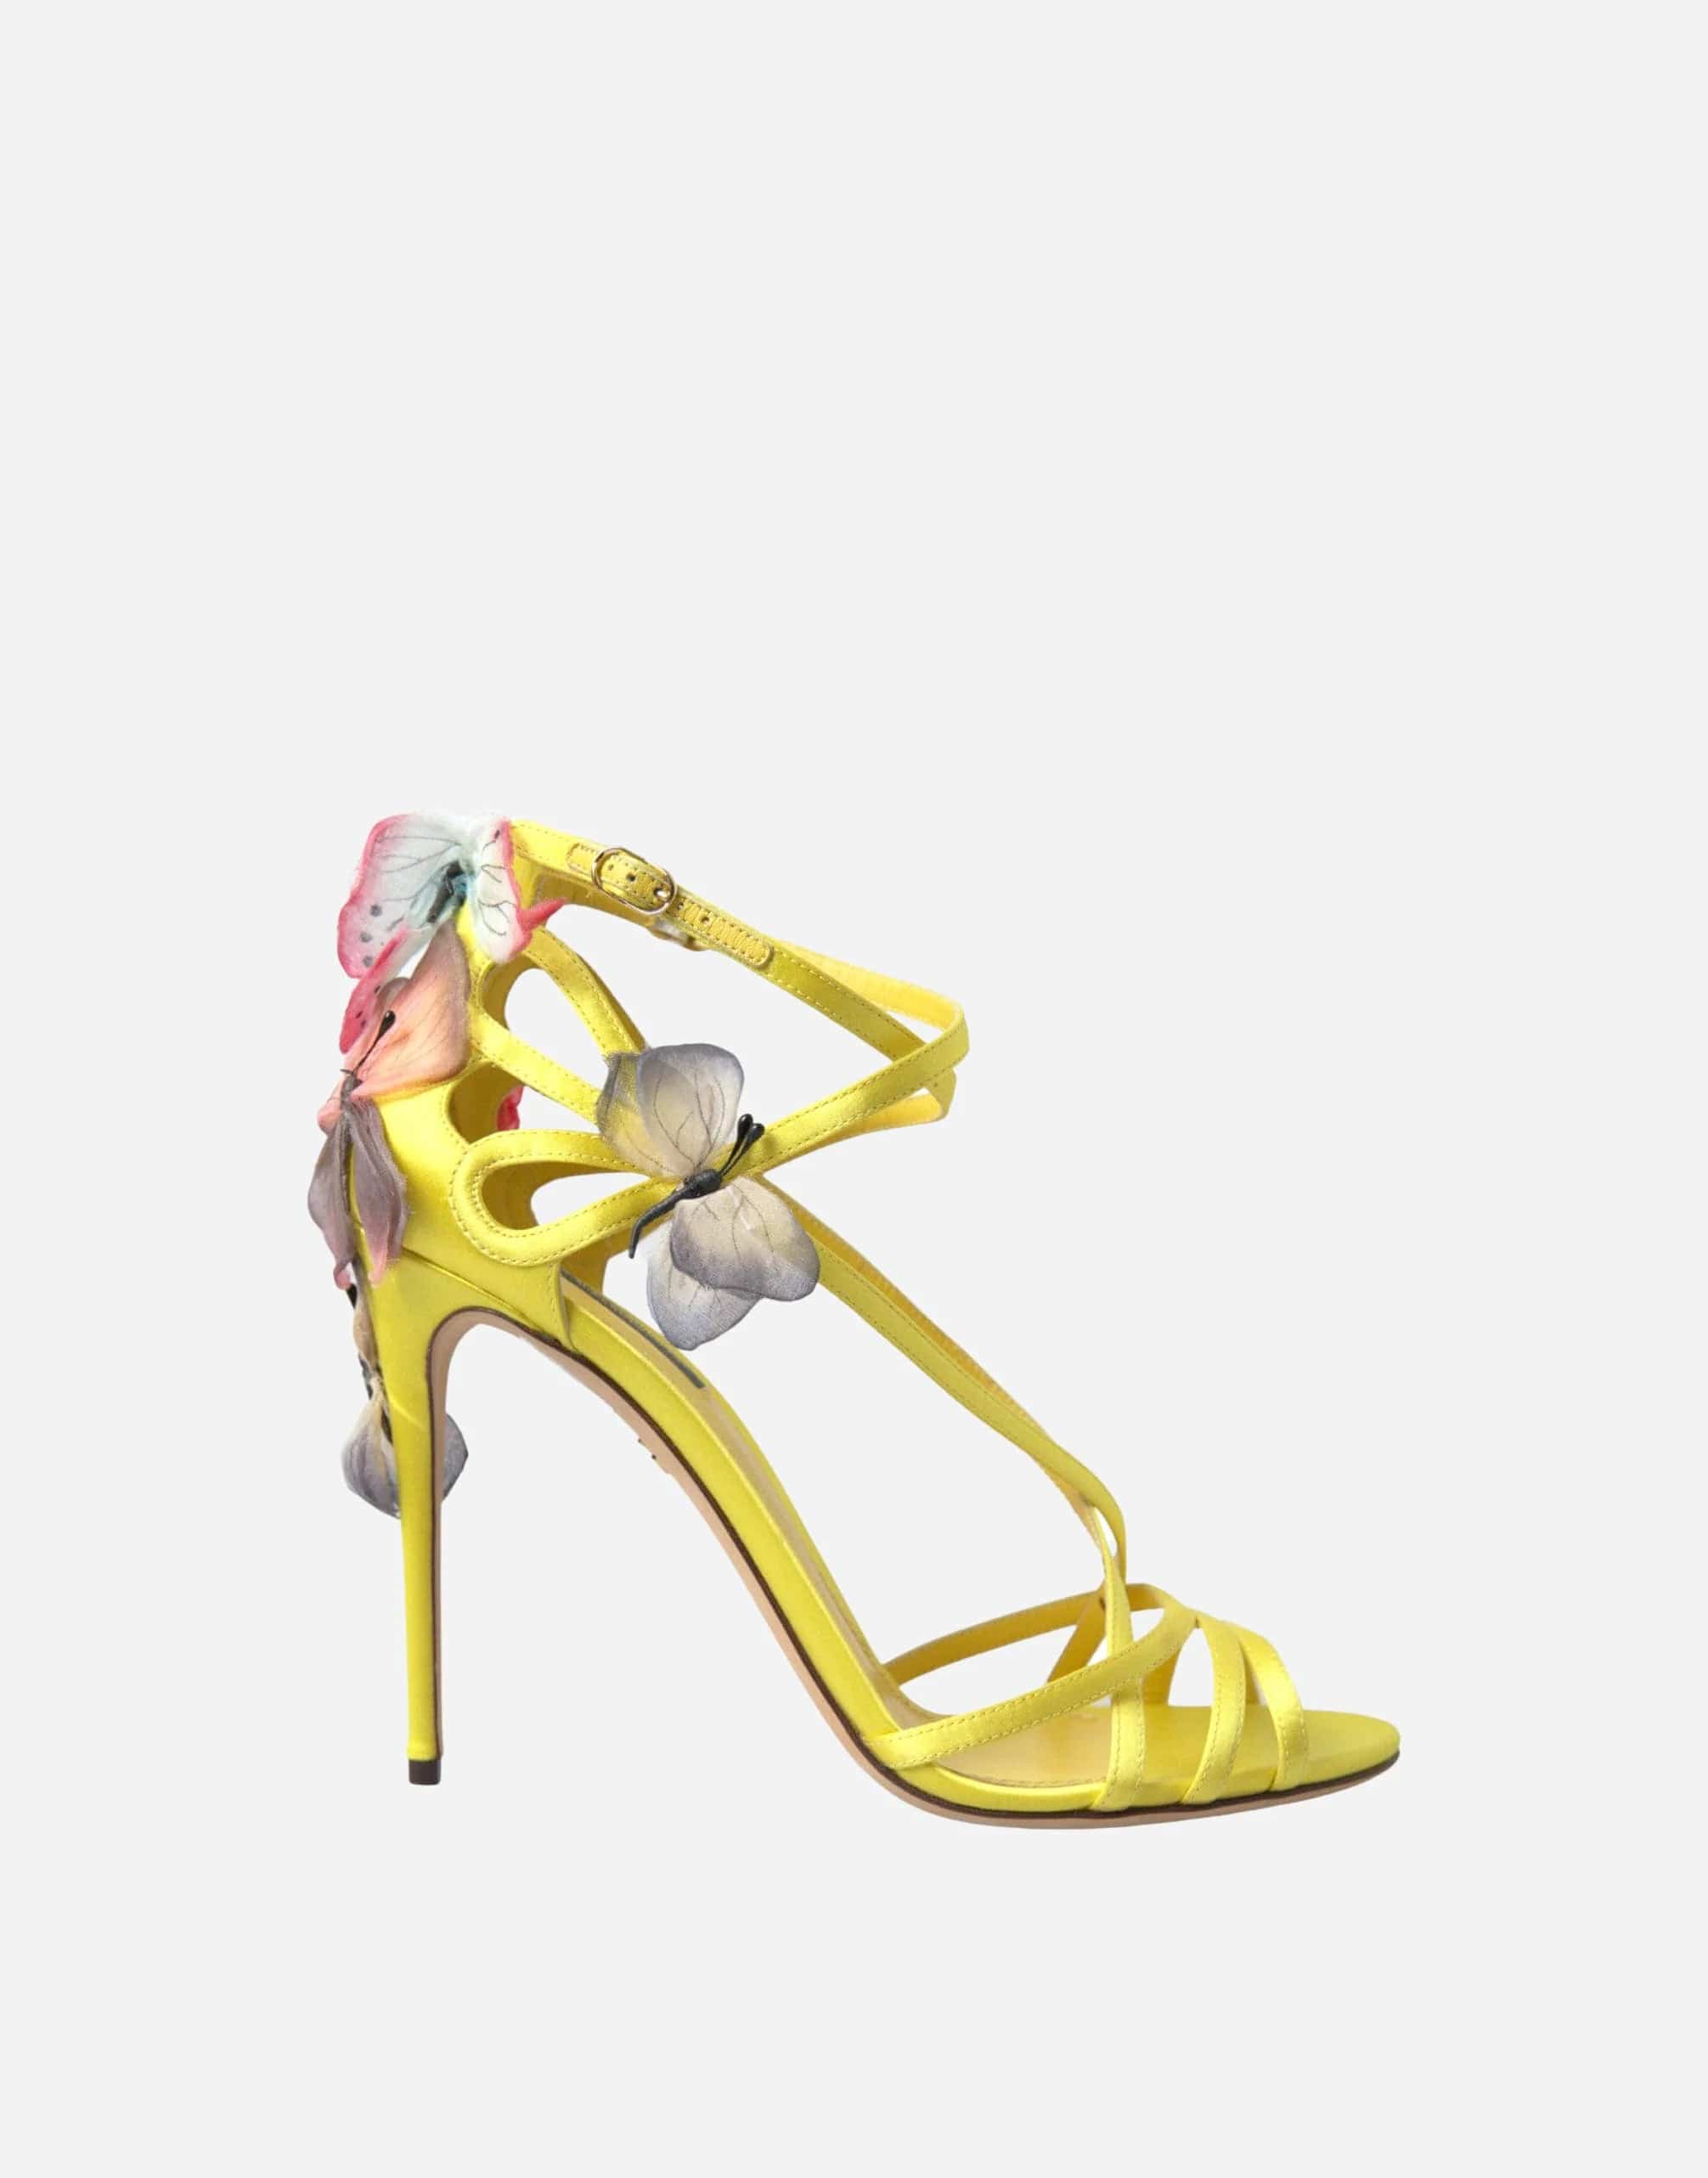 Aquazzura's Butterfly Papillon Sandals in Green, Metallic, Red and Yellow |  Heels, Butterfly heels, Strappy sandals heels